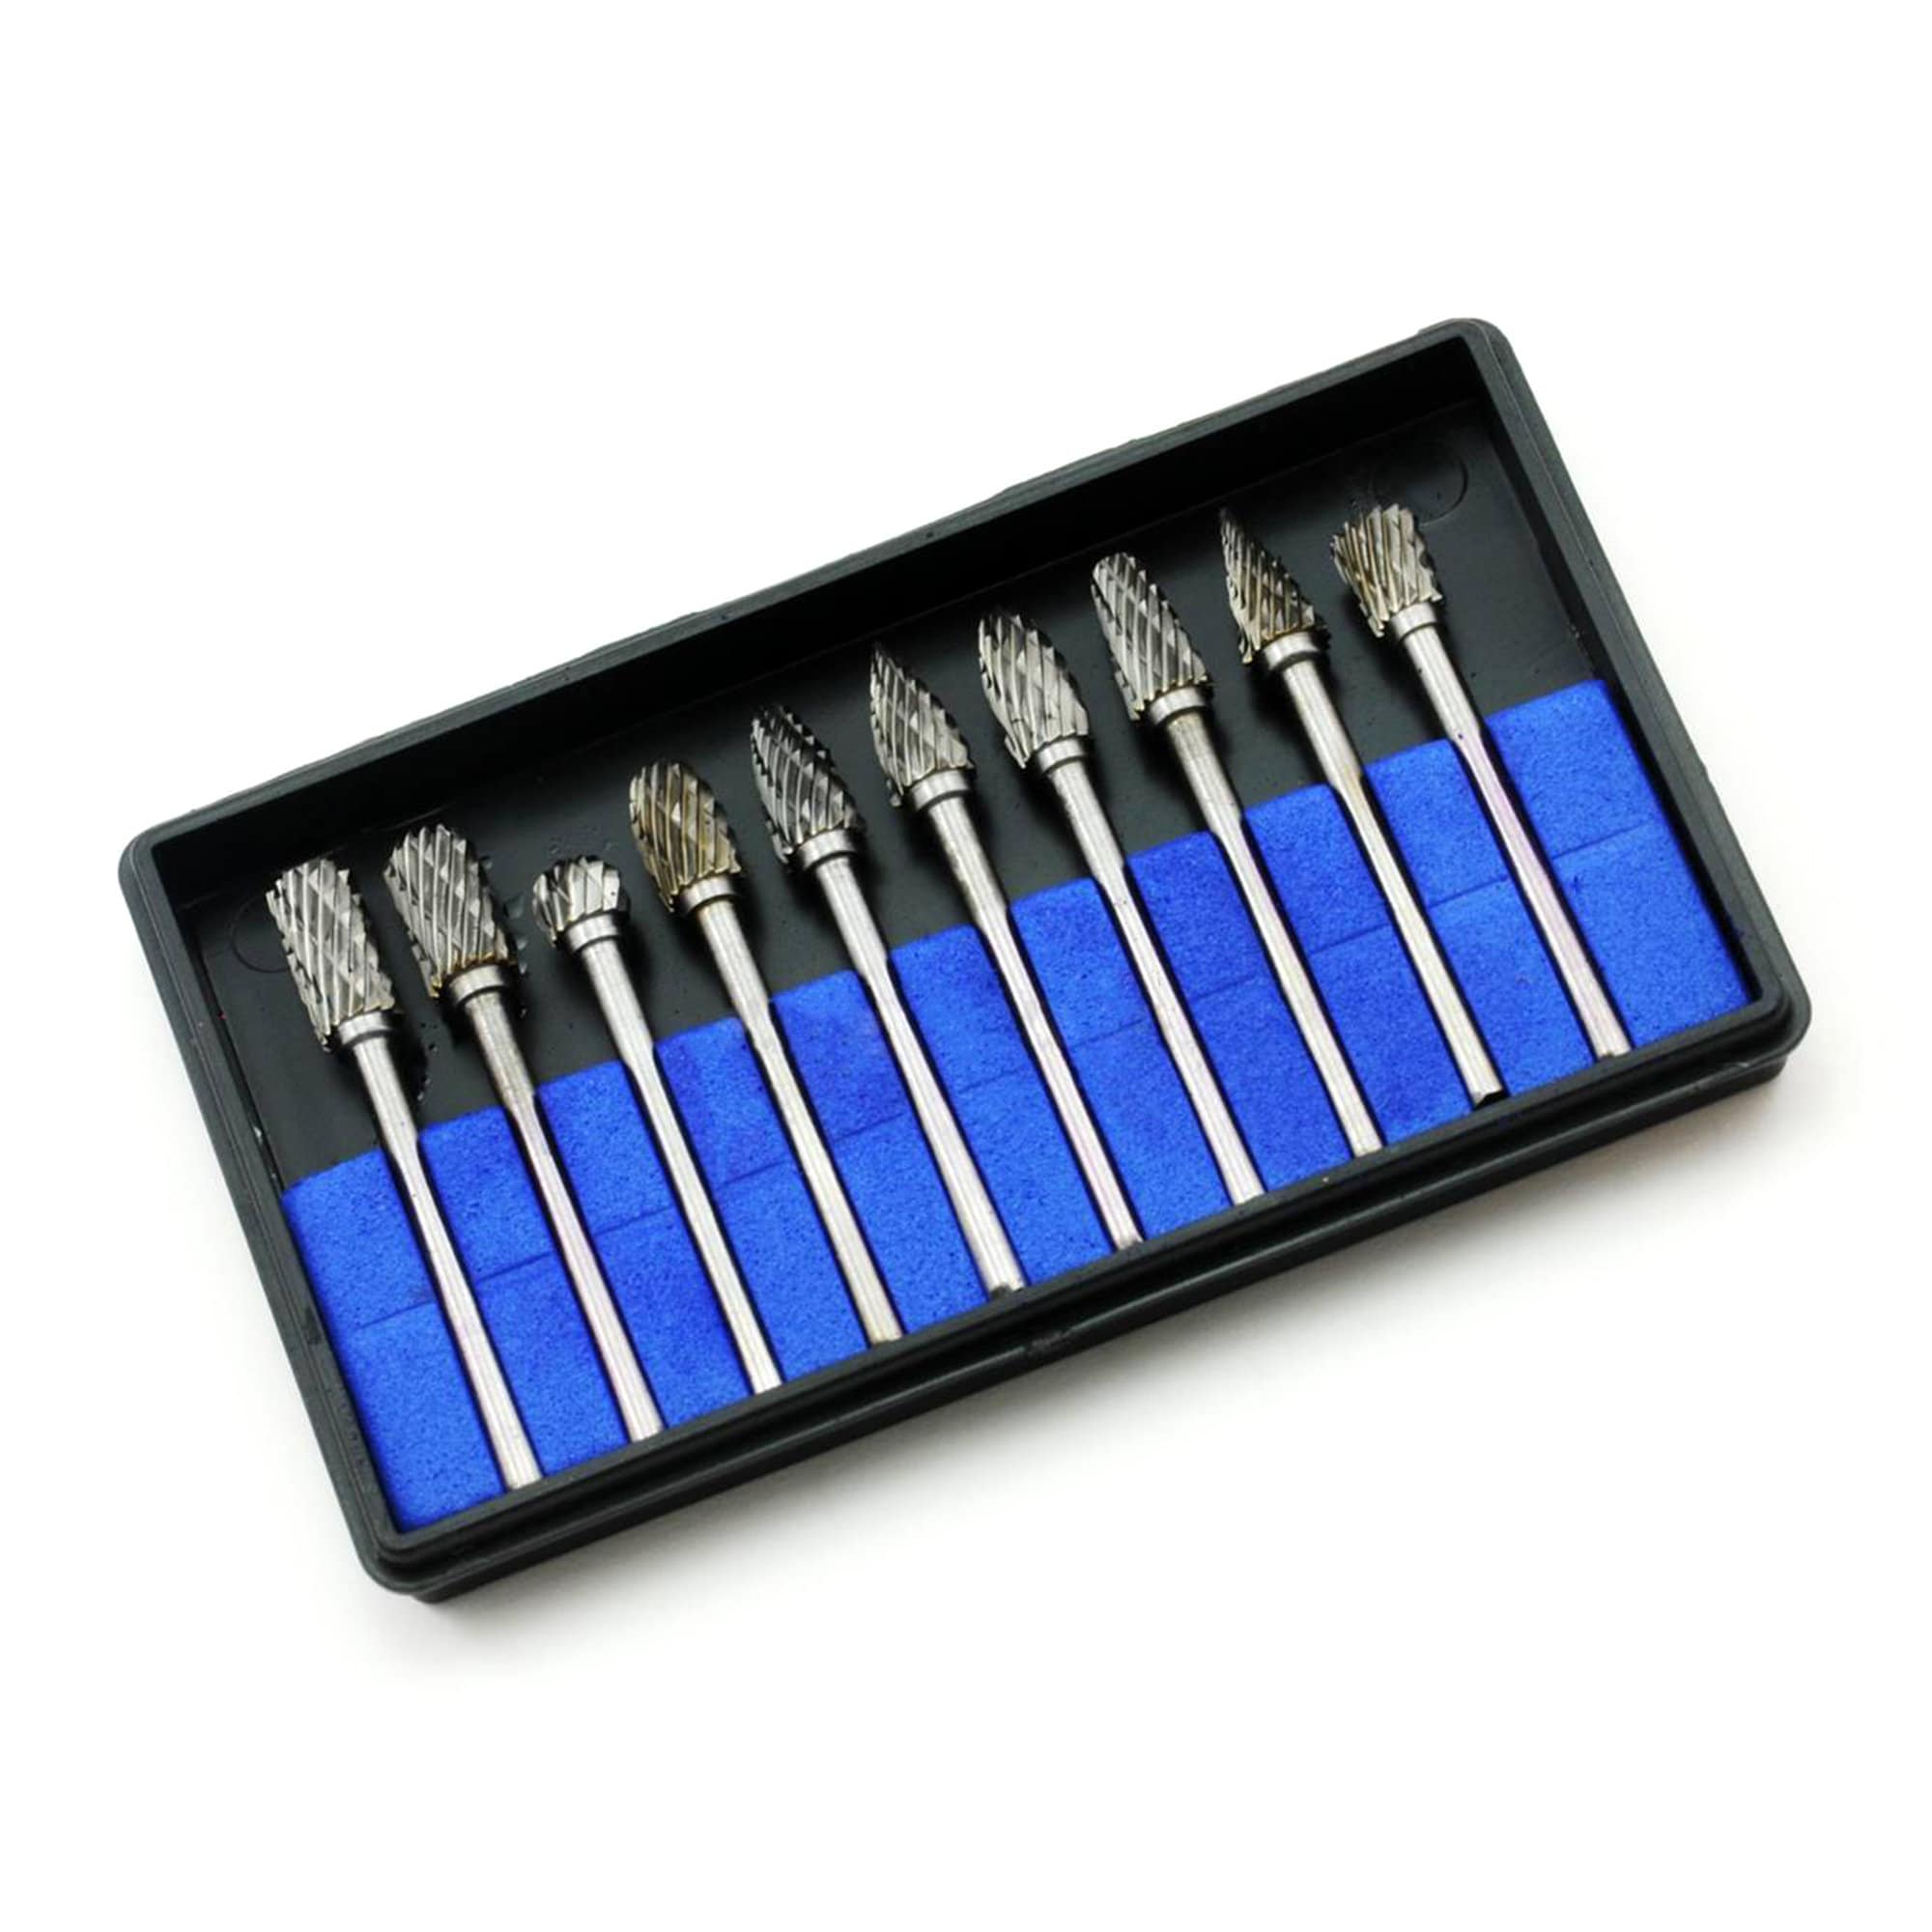 20x Wood Carving Engraving Drill Carbide Rotary Burr Bit Rotary